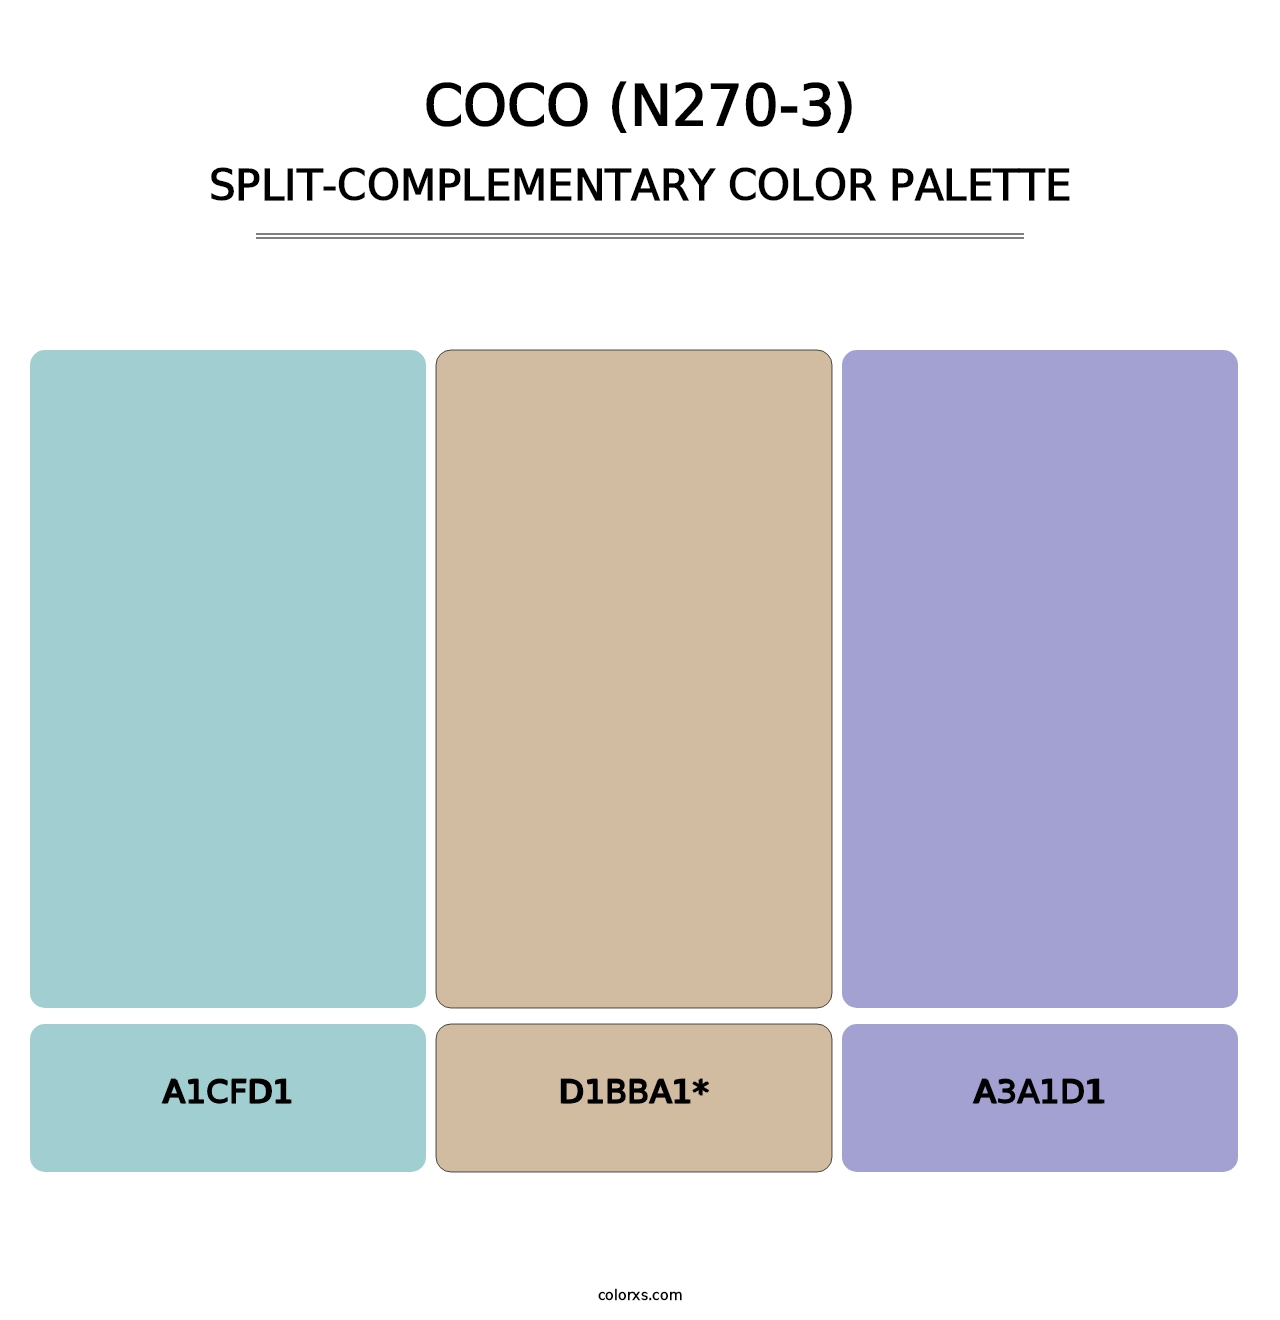 Coco (N270-3) - Split-Complementary Color Palette